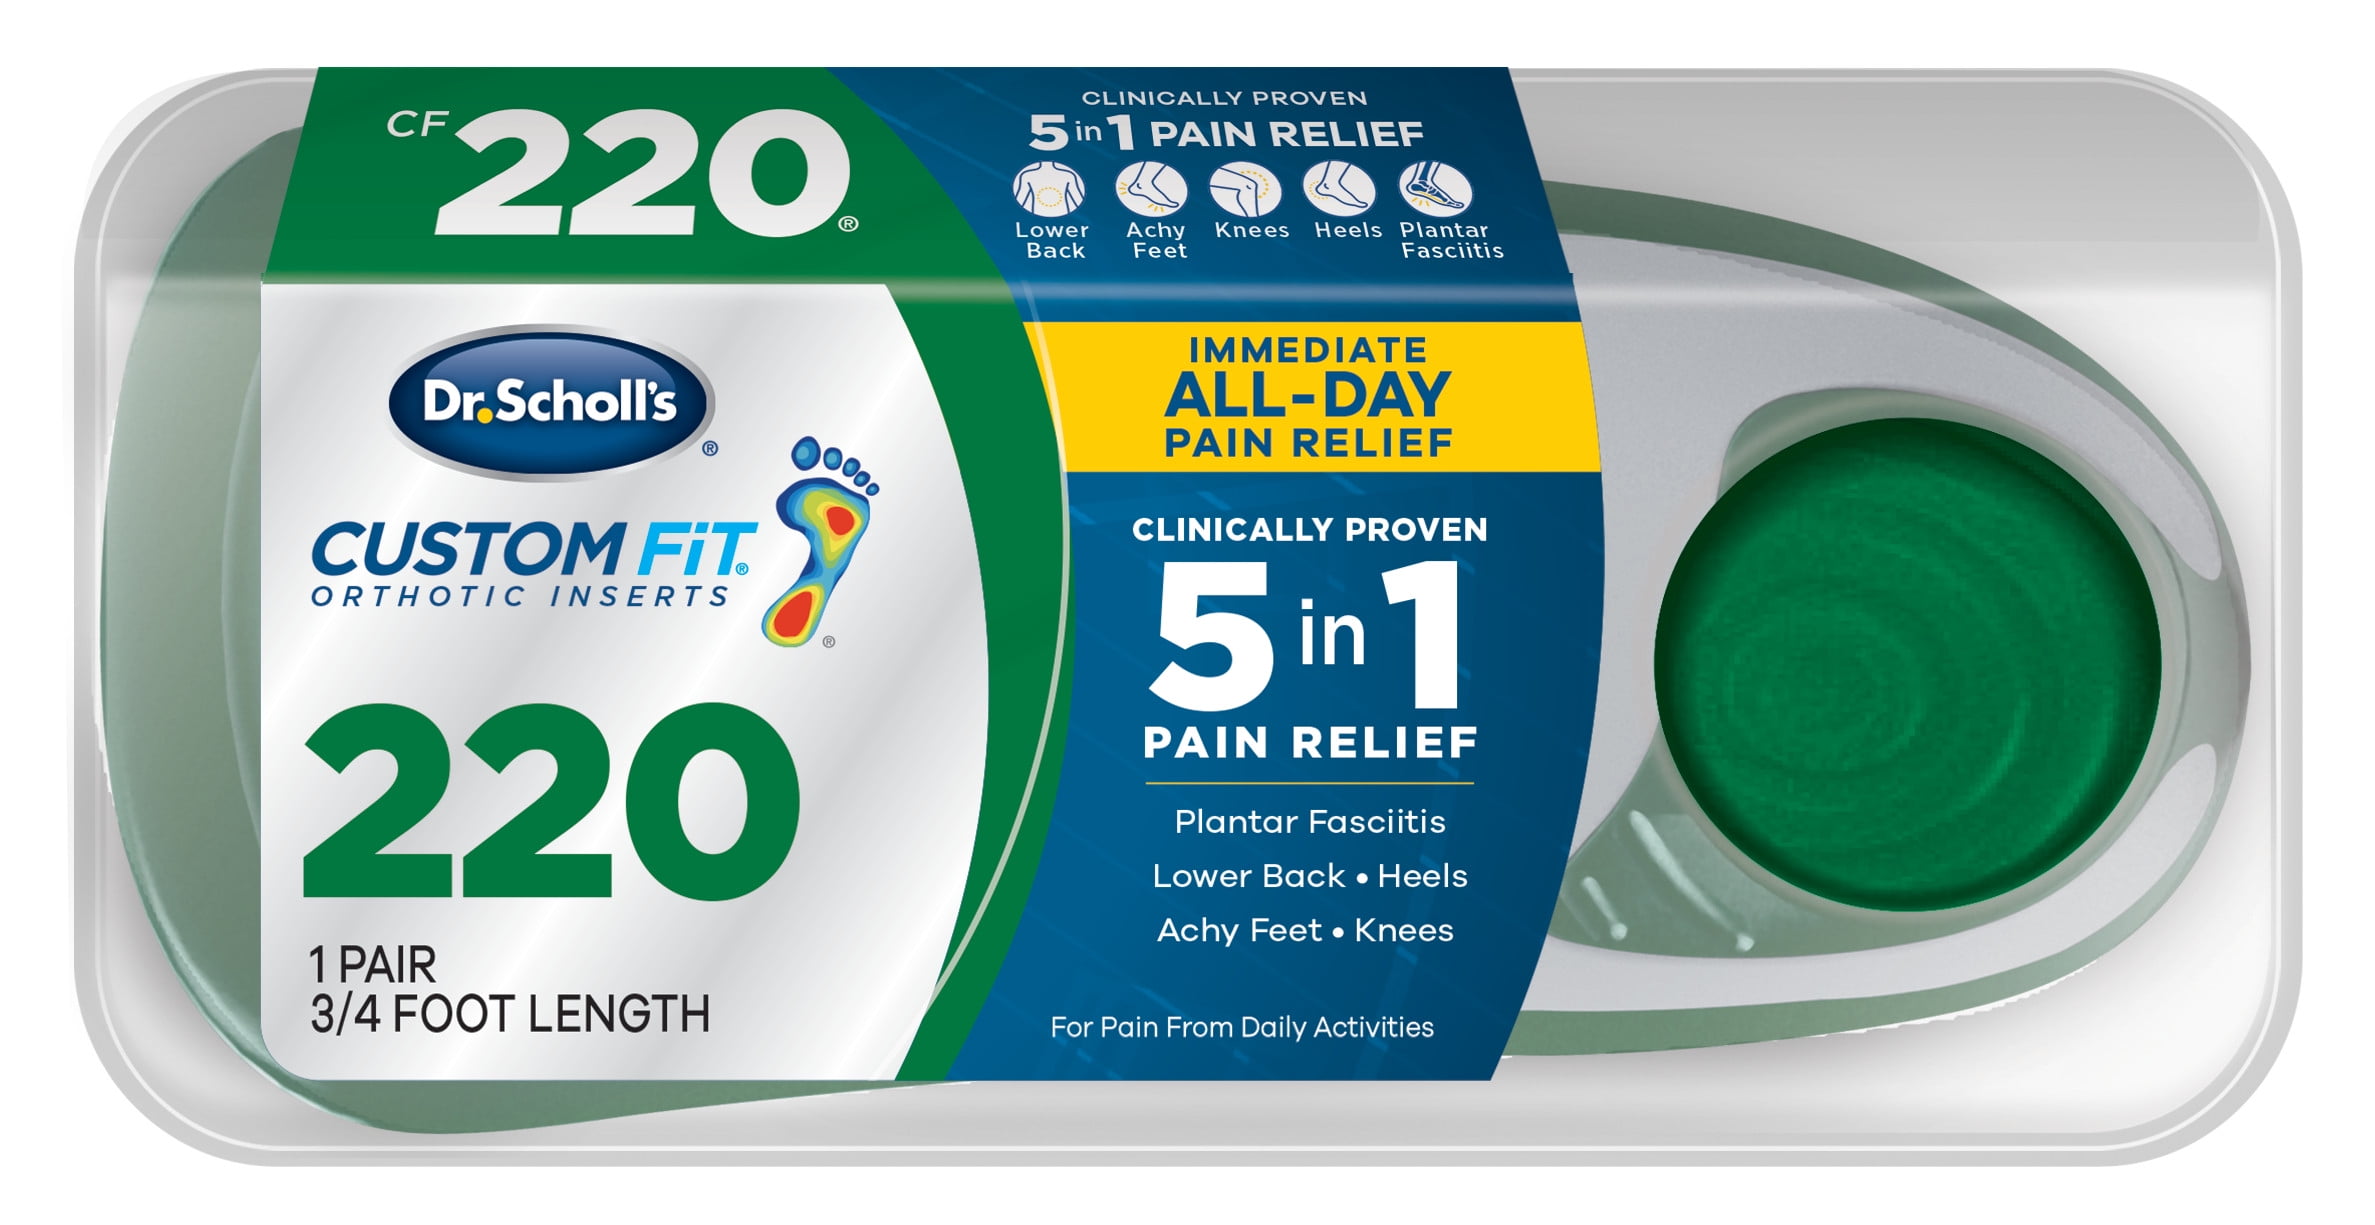 Dr. Scholl's Dr Scholls Custom Fit CF 220 Orthotic Insole Shoe Inserts for Foot Knee and Lower Back Relief 1 Pair